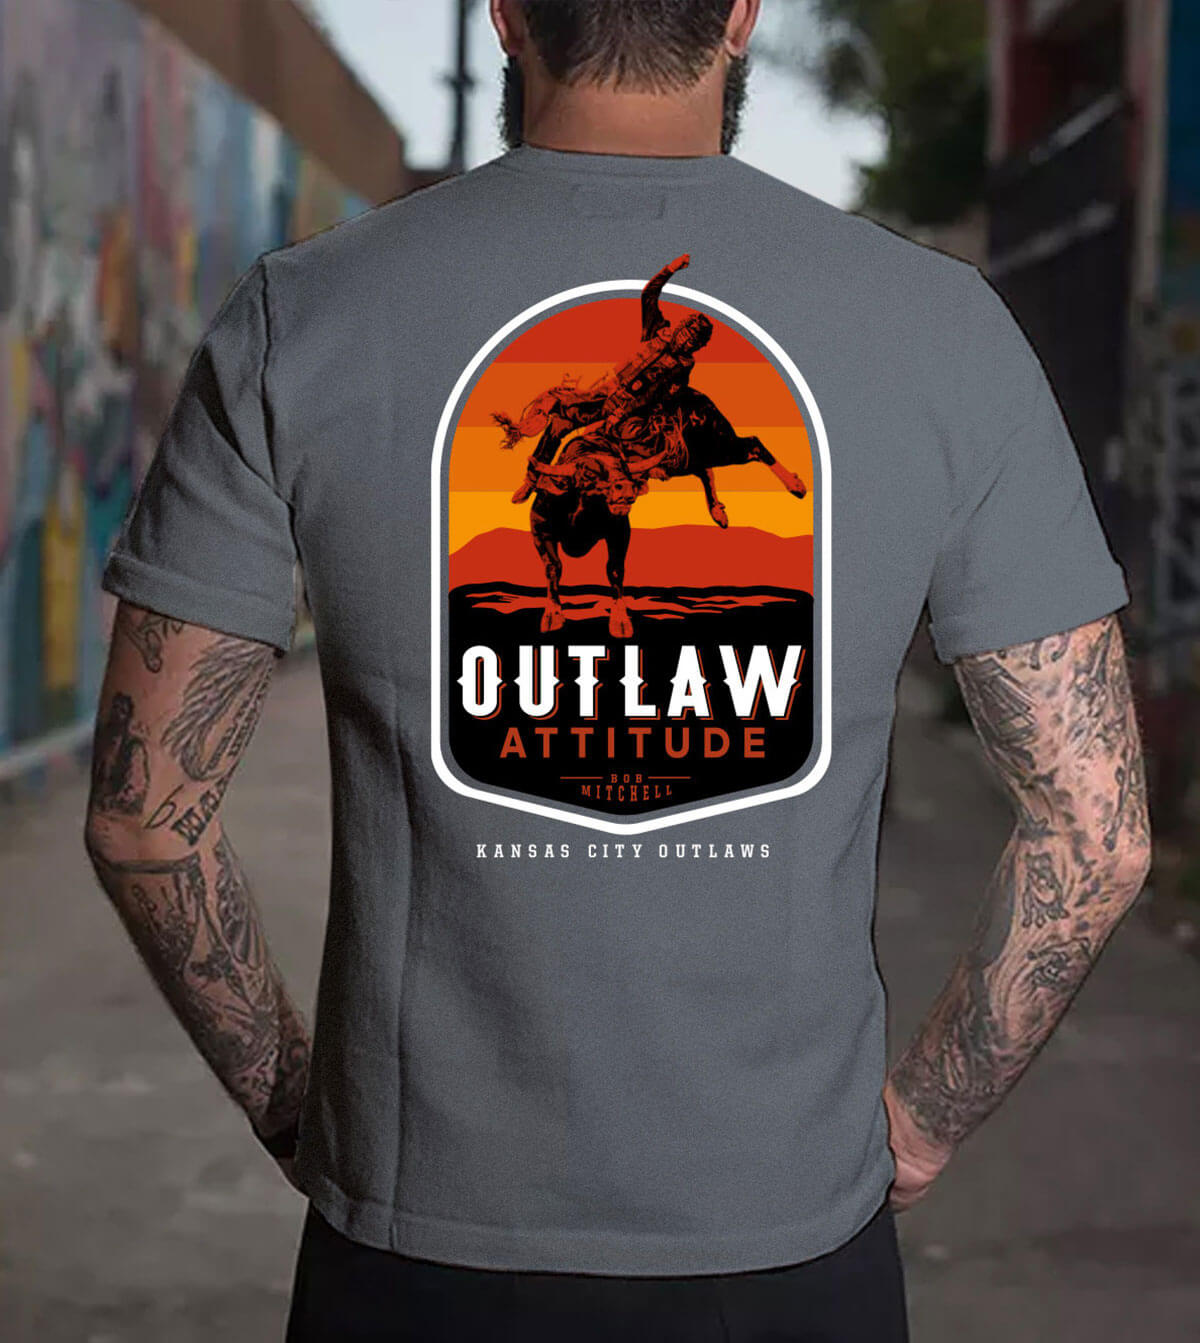 Back view of the "Fear the Outlaws" ft. Bob Mitchell t-shirt.